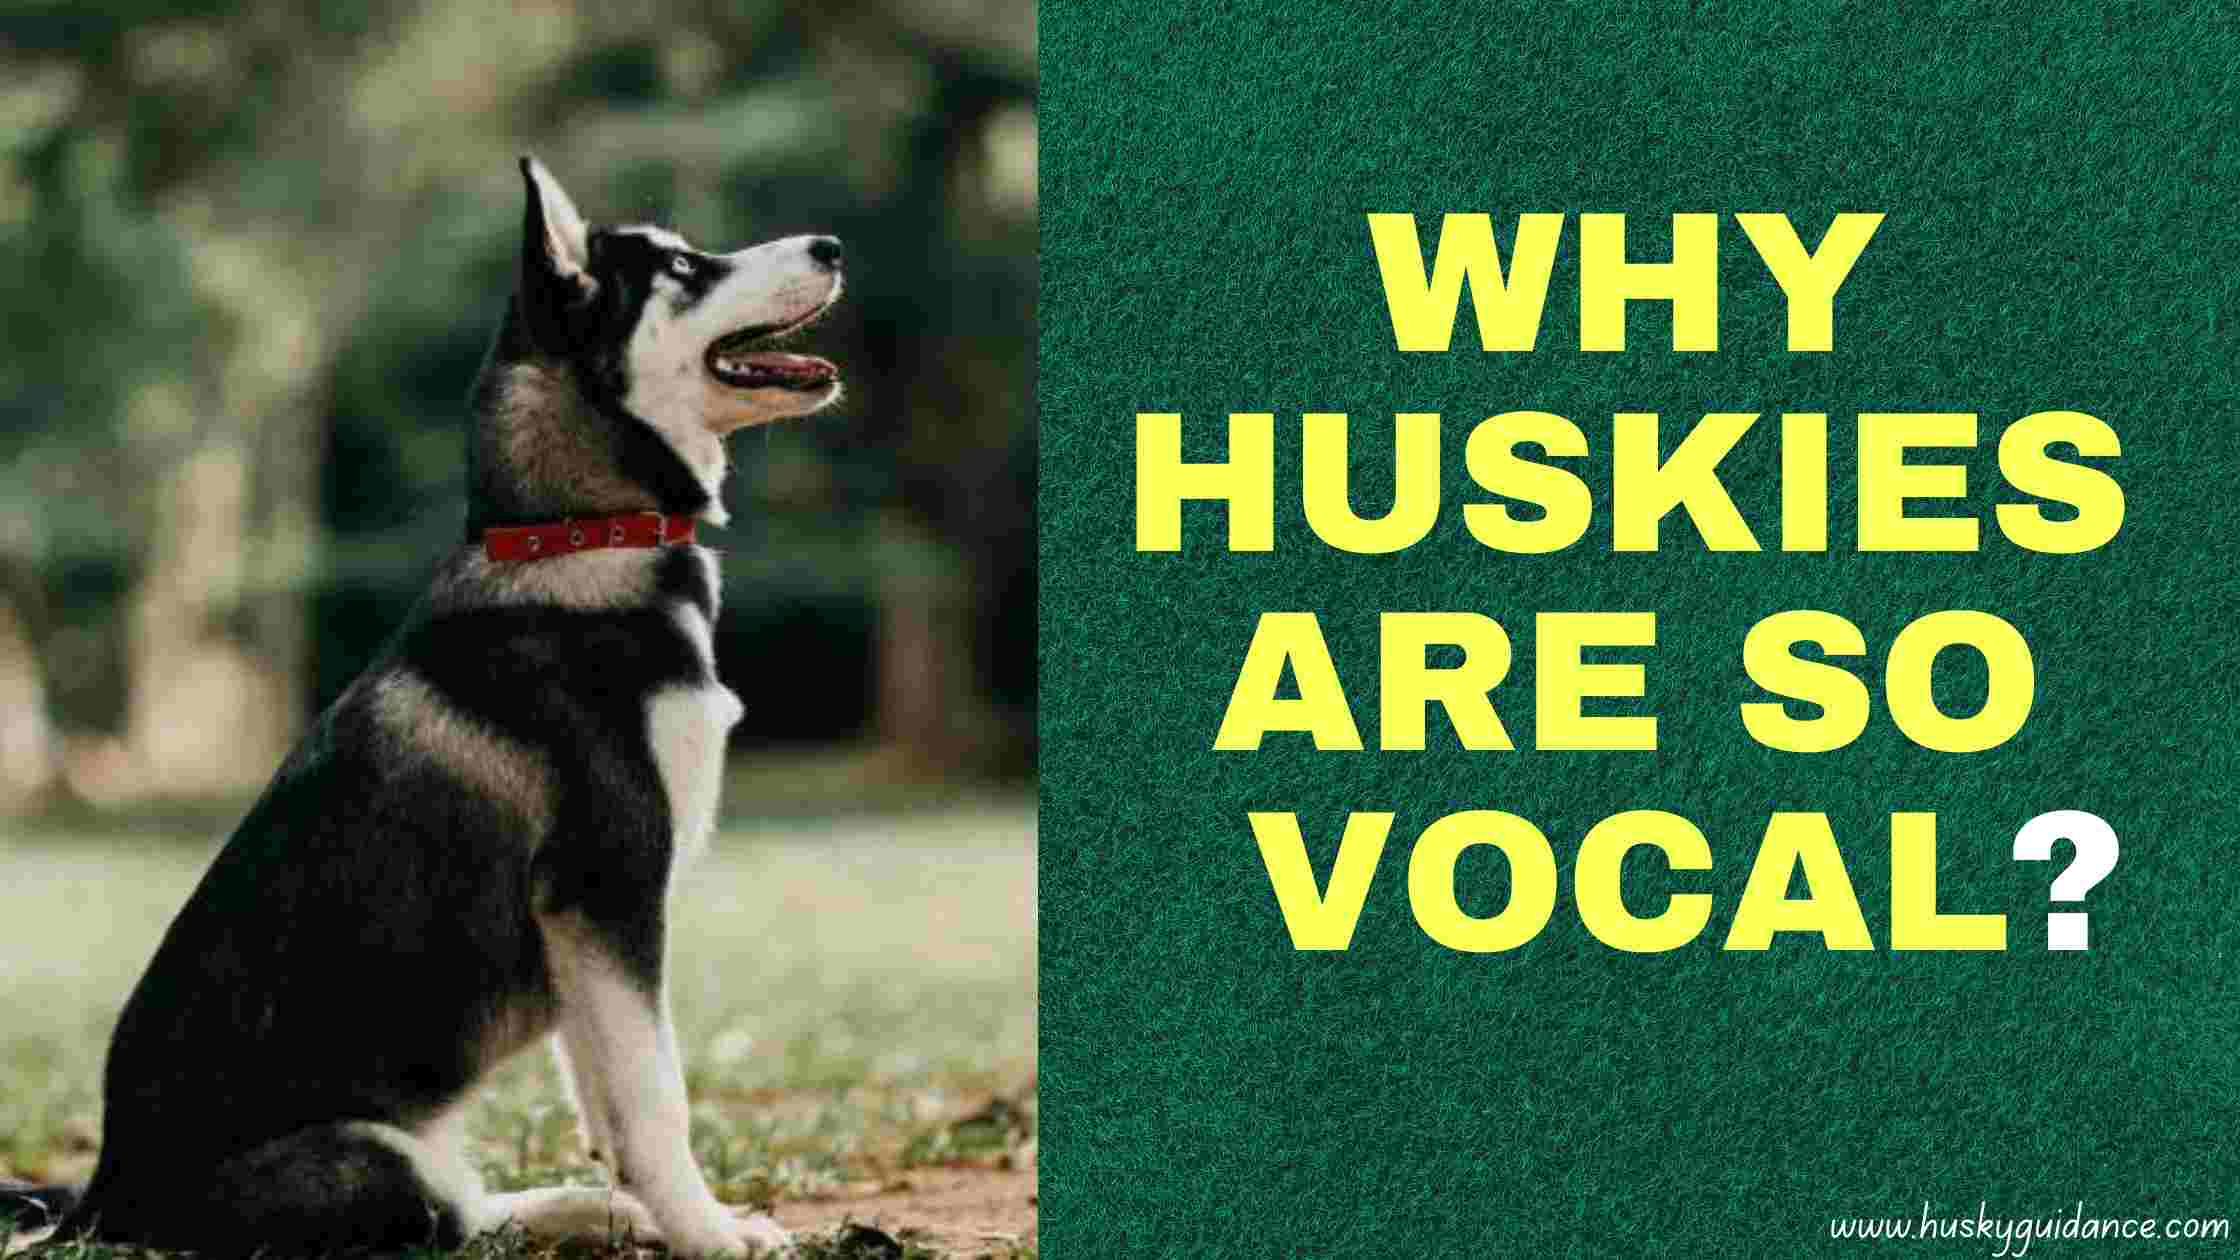 Why are huskies so vocal